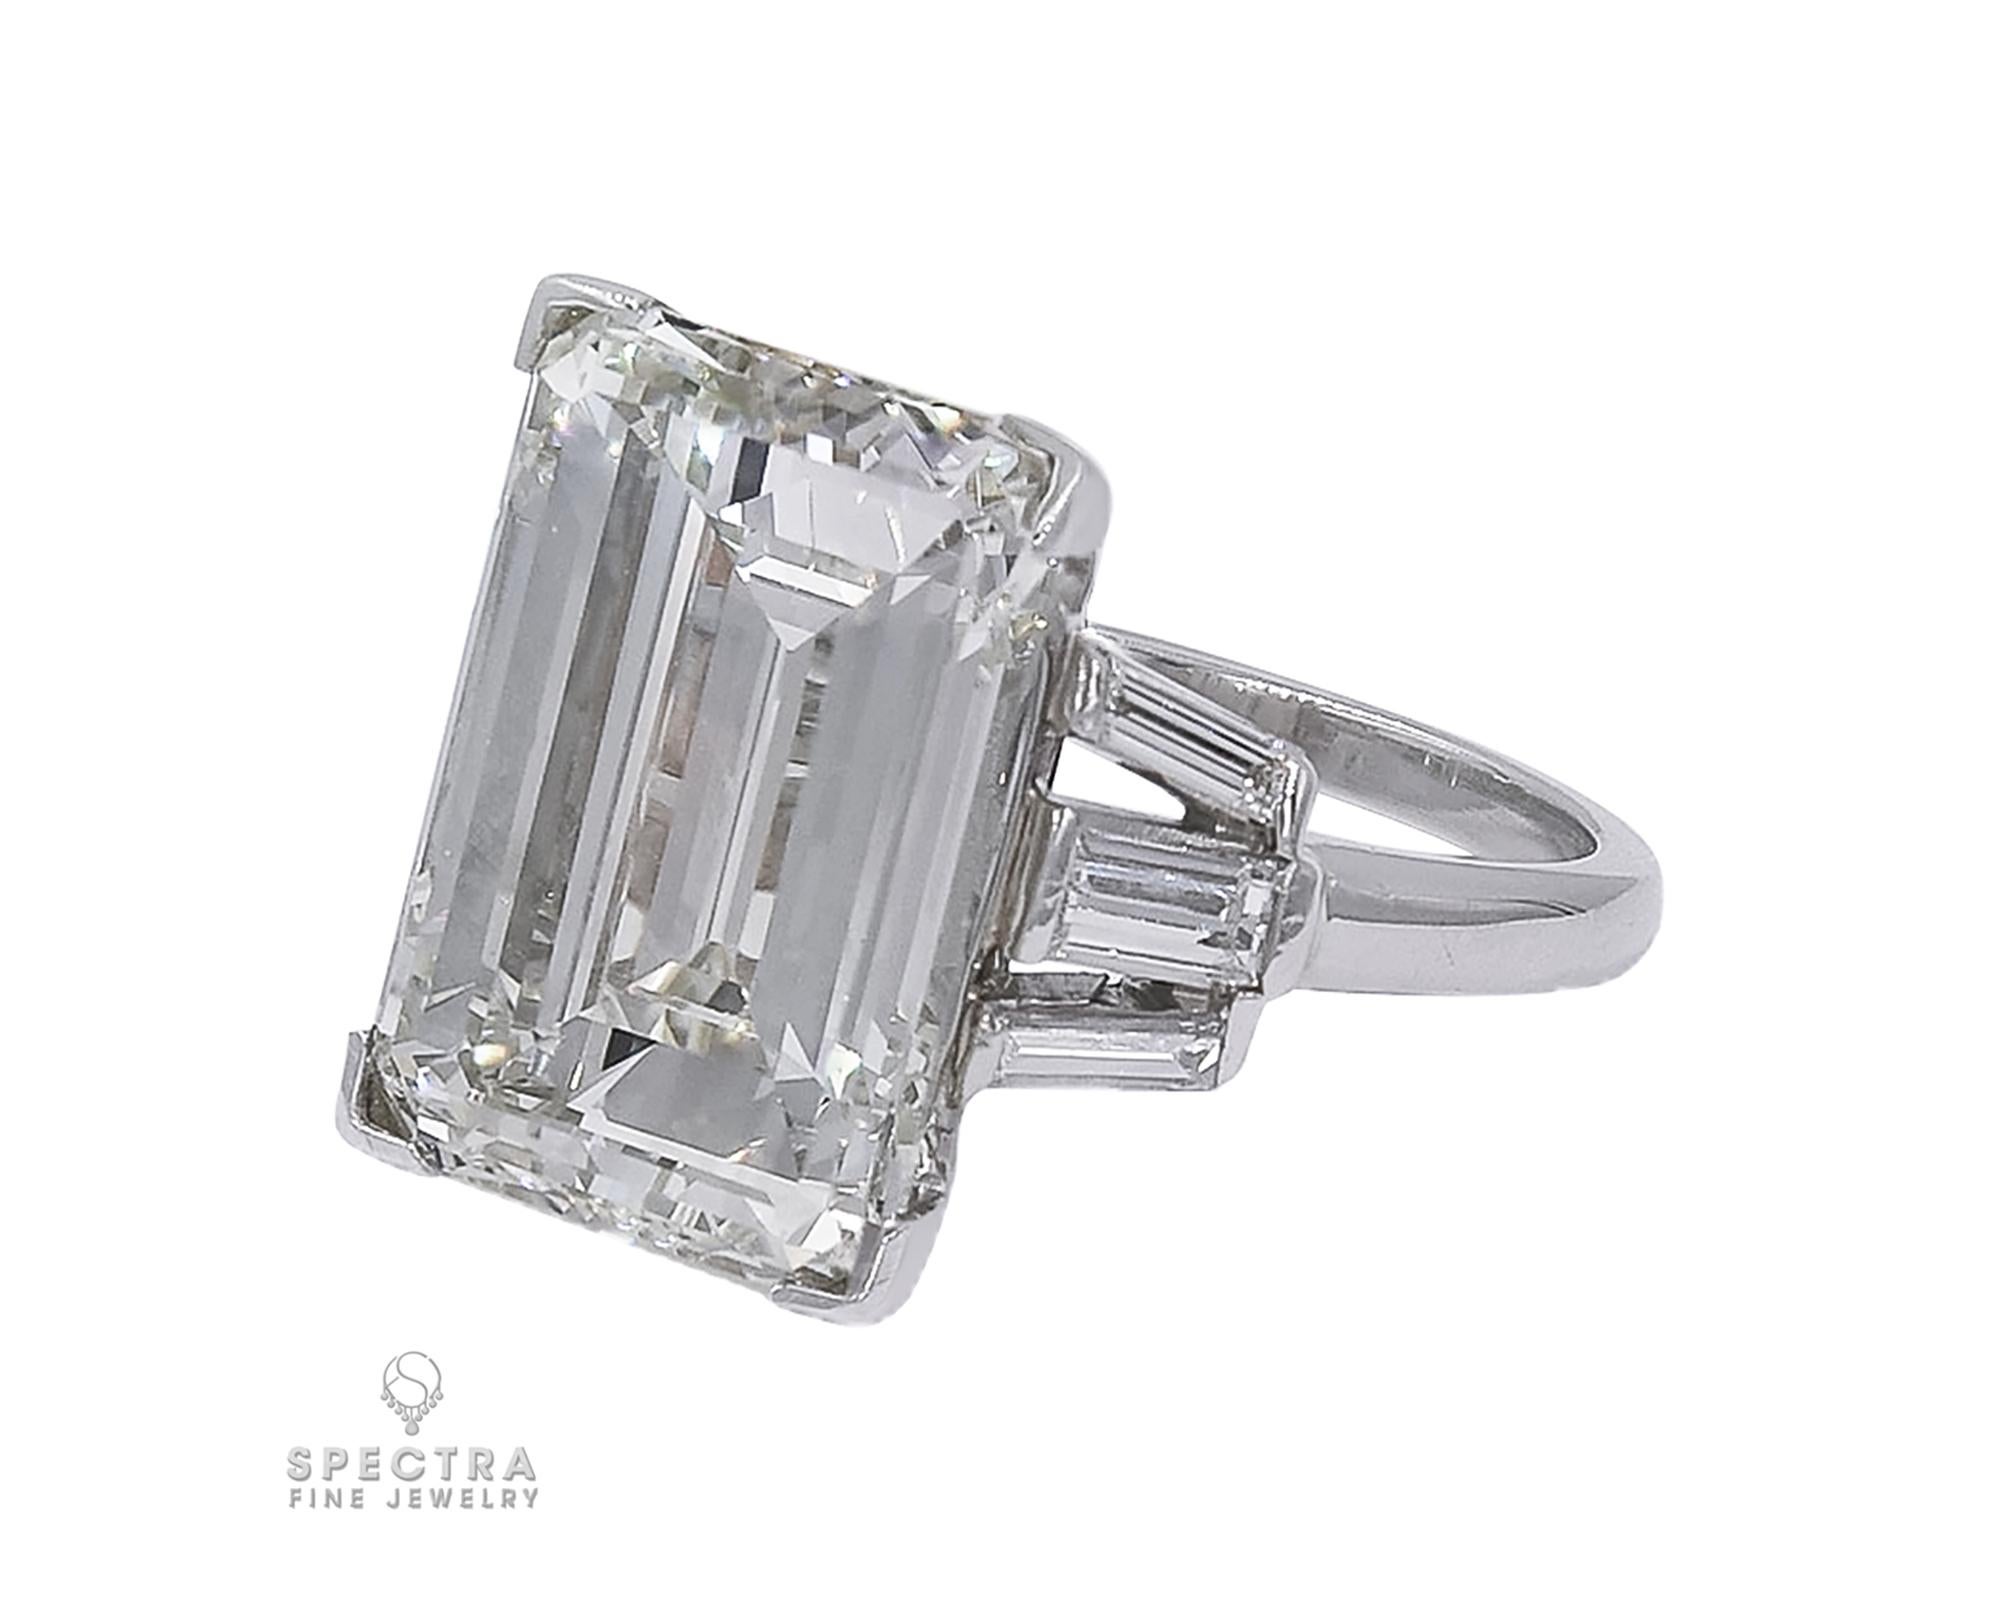 A stunning engagement ring boasting an emerald-cut diamond weighing 11.96 carats.
Accompanied by a GIA report stating that the diamond is of O-P color, VS1 clarity.
6 tapered baguette diamonds on the sides.
Metal is 18k white gold.
Gross weight is